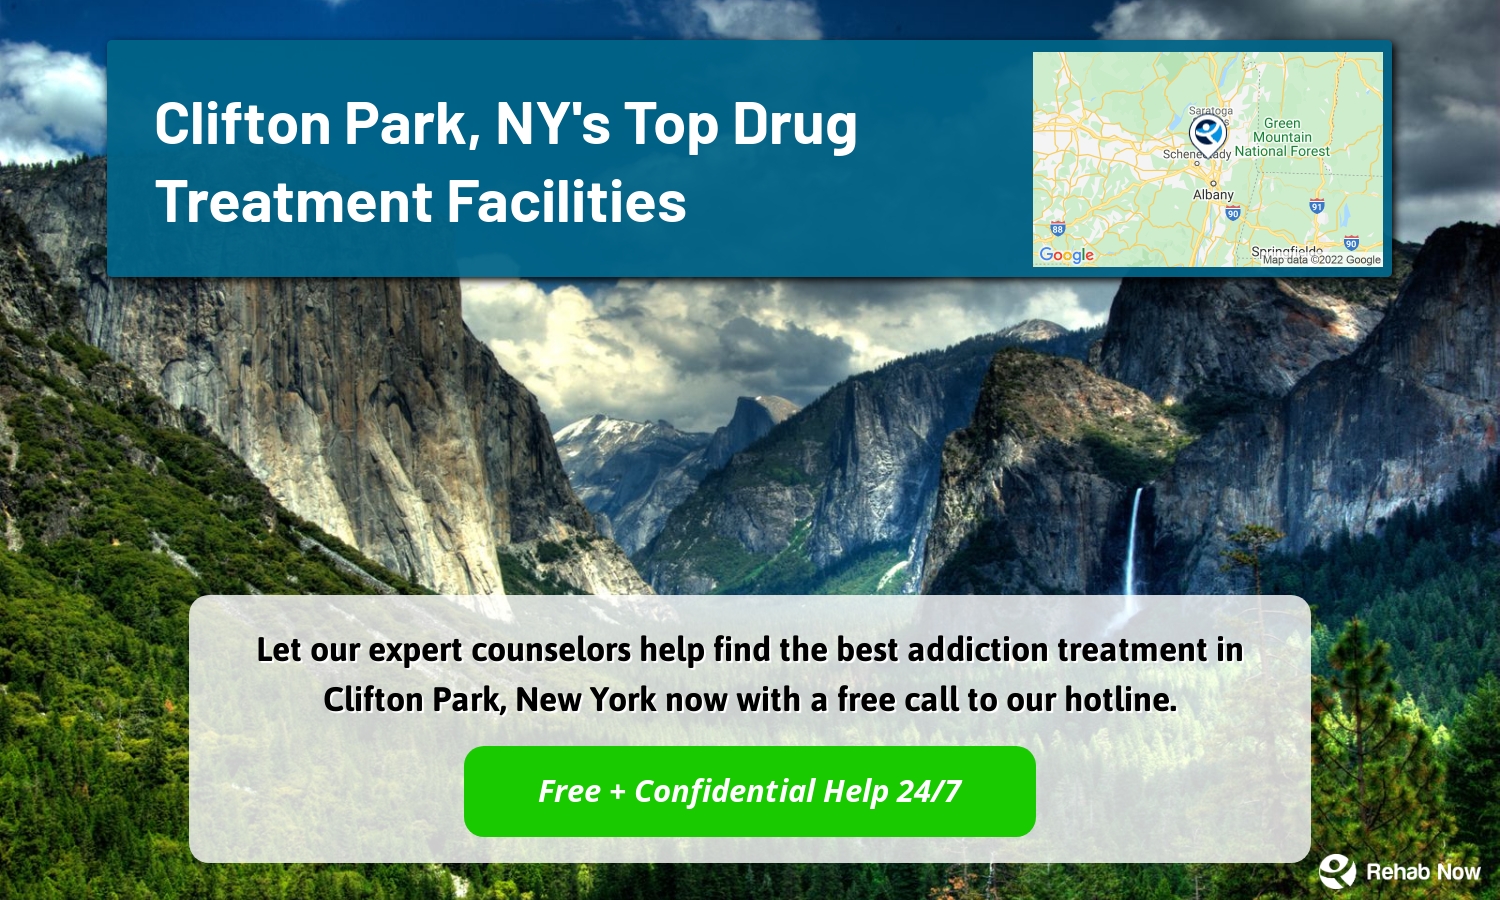 Let our expert counselors help find the best addiction treatment in Clifton Park, New York now with a free call to our hotline.